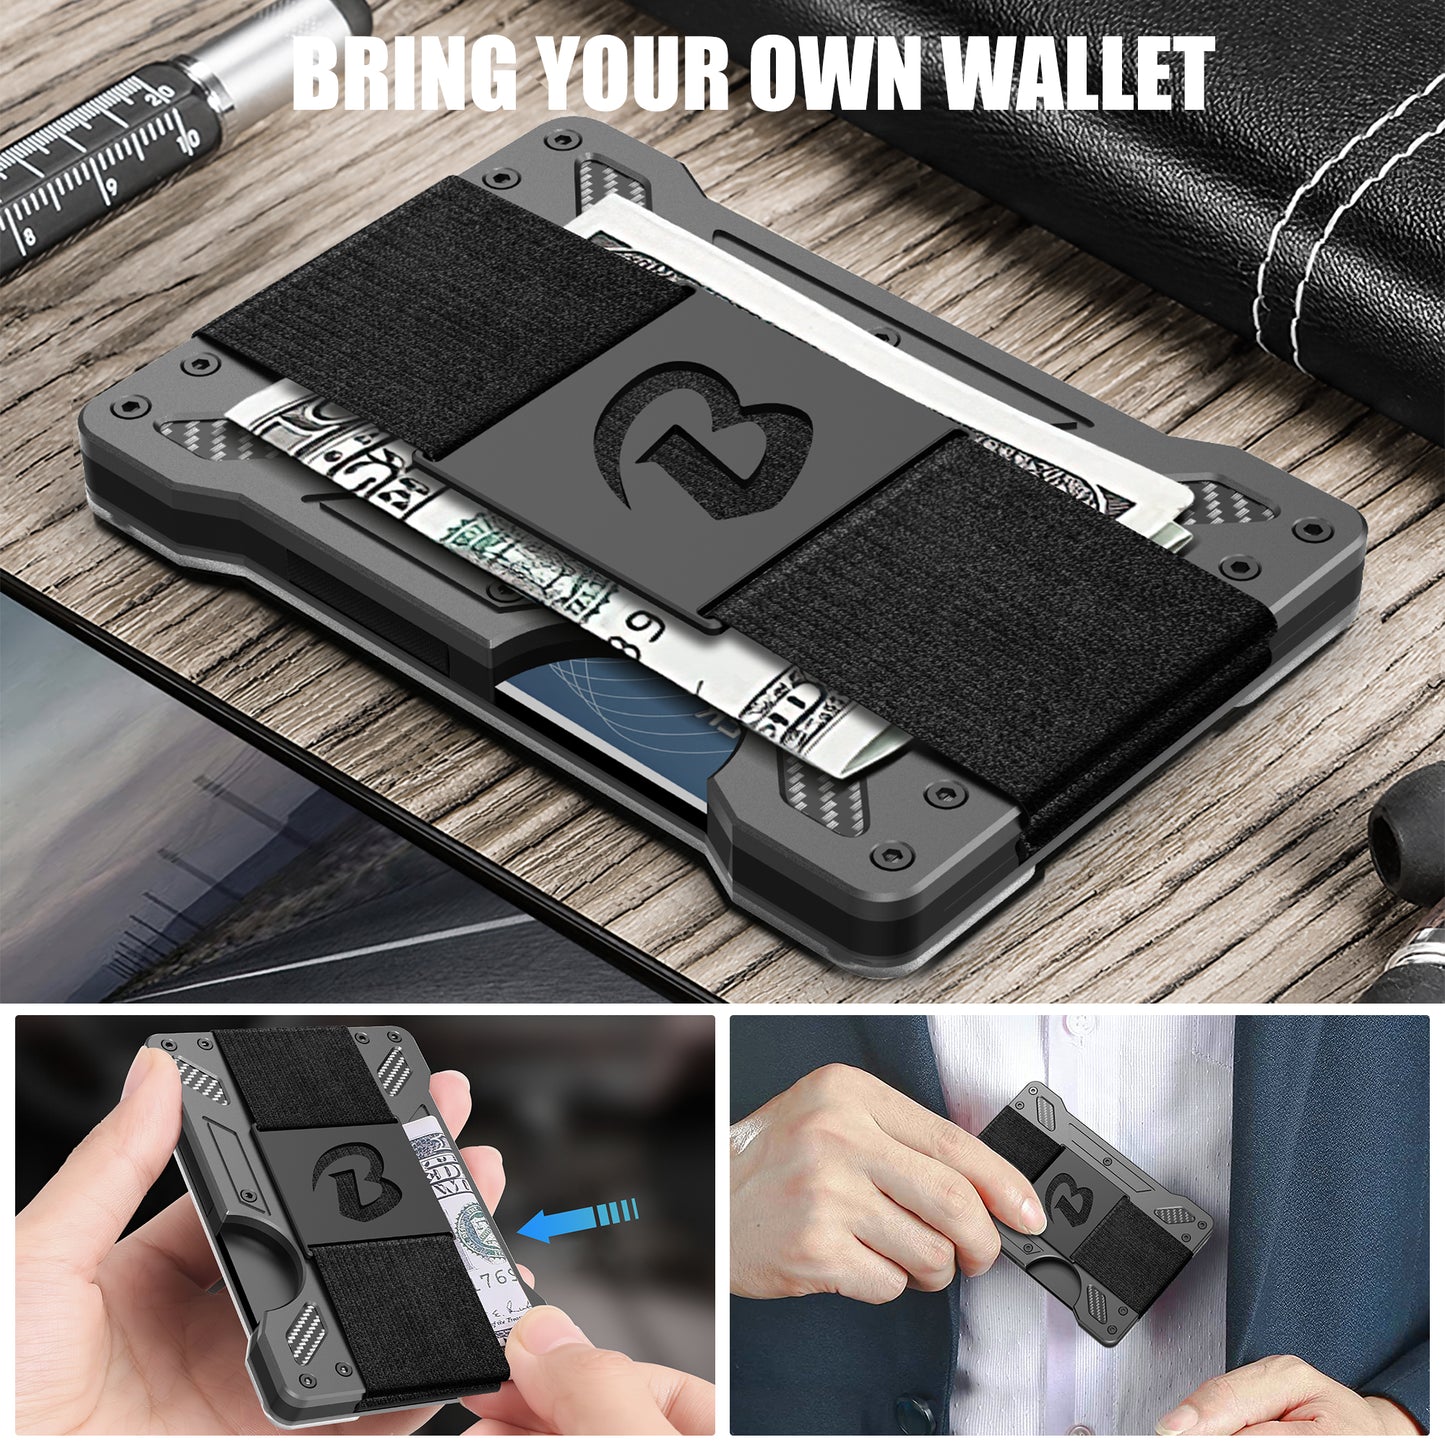 Wallet For Men - Slim Aluminum Metal Mens Wallets with 1 Clear window ID Badge Holder, RFID Blocking, Holds up 15 Cards with Cash Strap. Ultra-Thin Credit Card Holder Minimalist Wallet